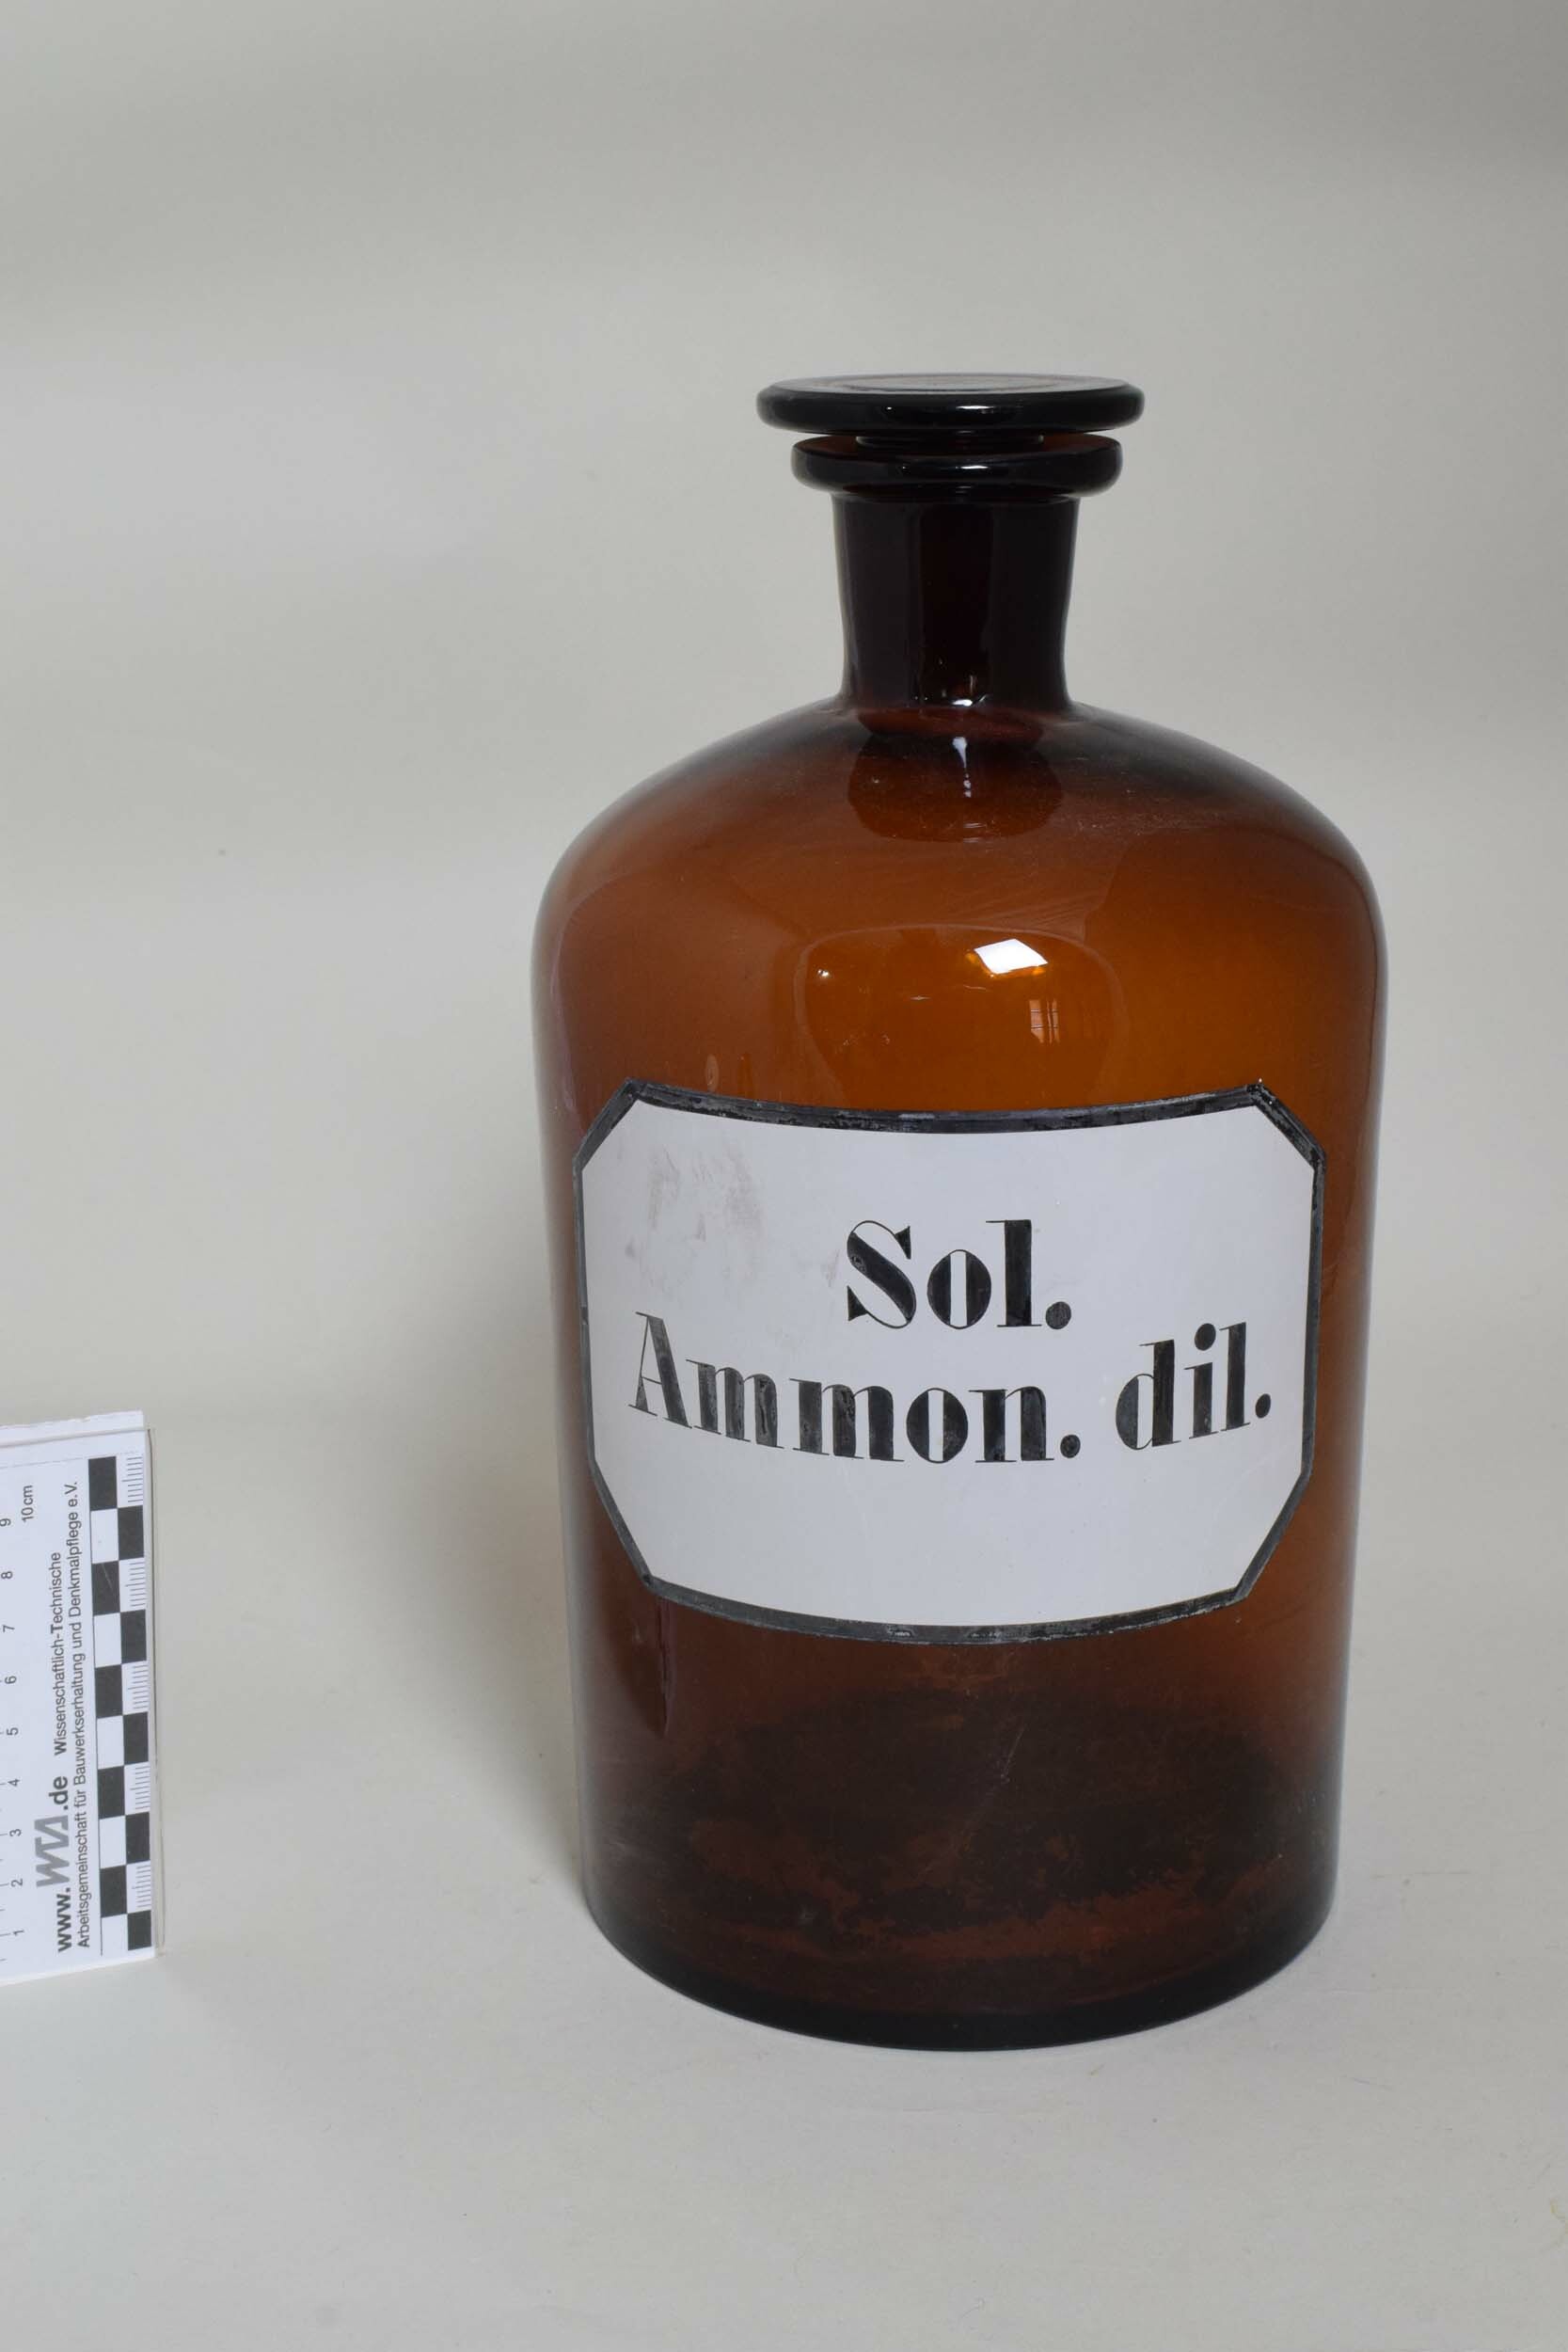 Apothekenflasche "Sol. Ammon.dil." (Heimatmuseum Dohna CC BY-NC-SA)